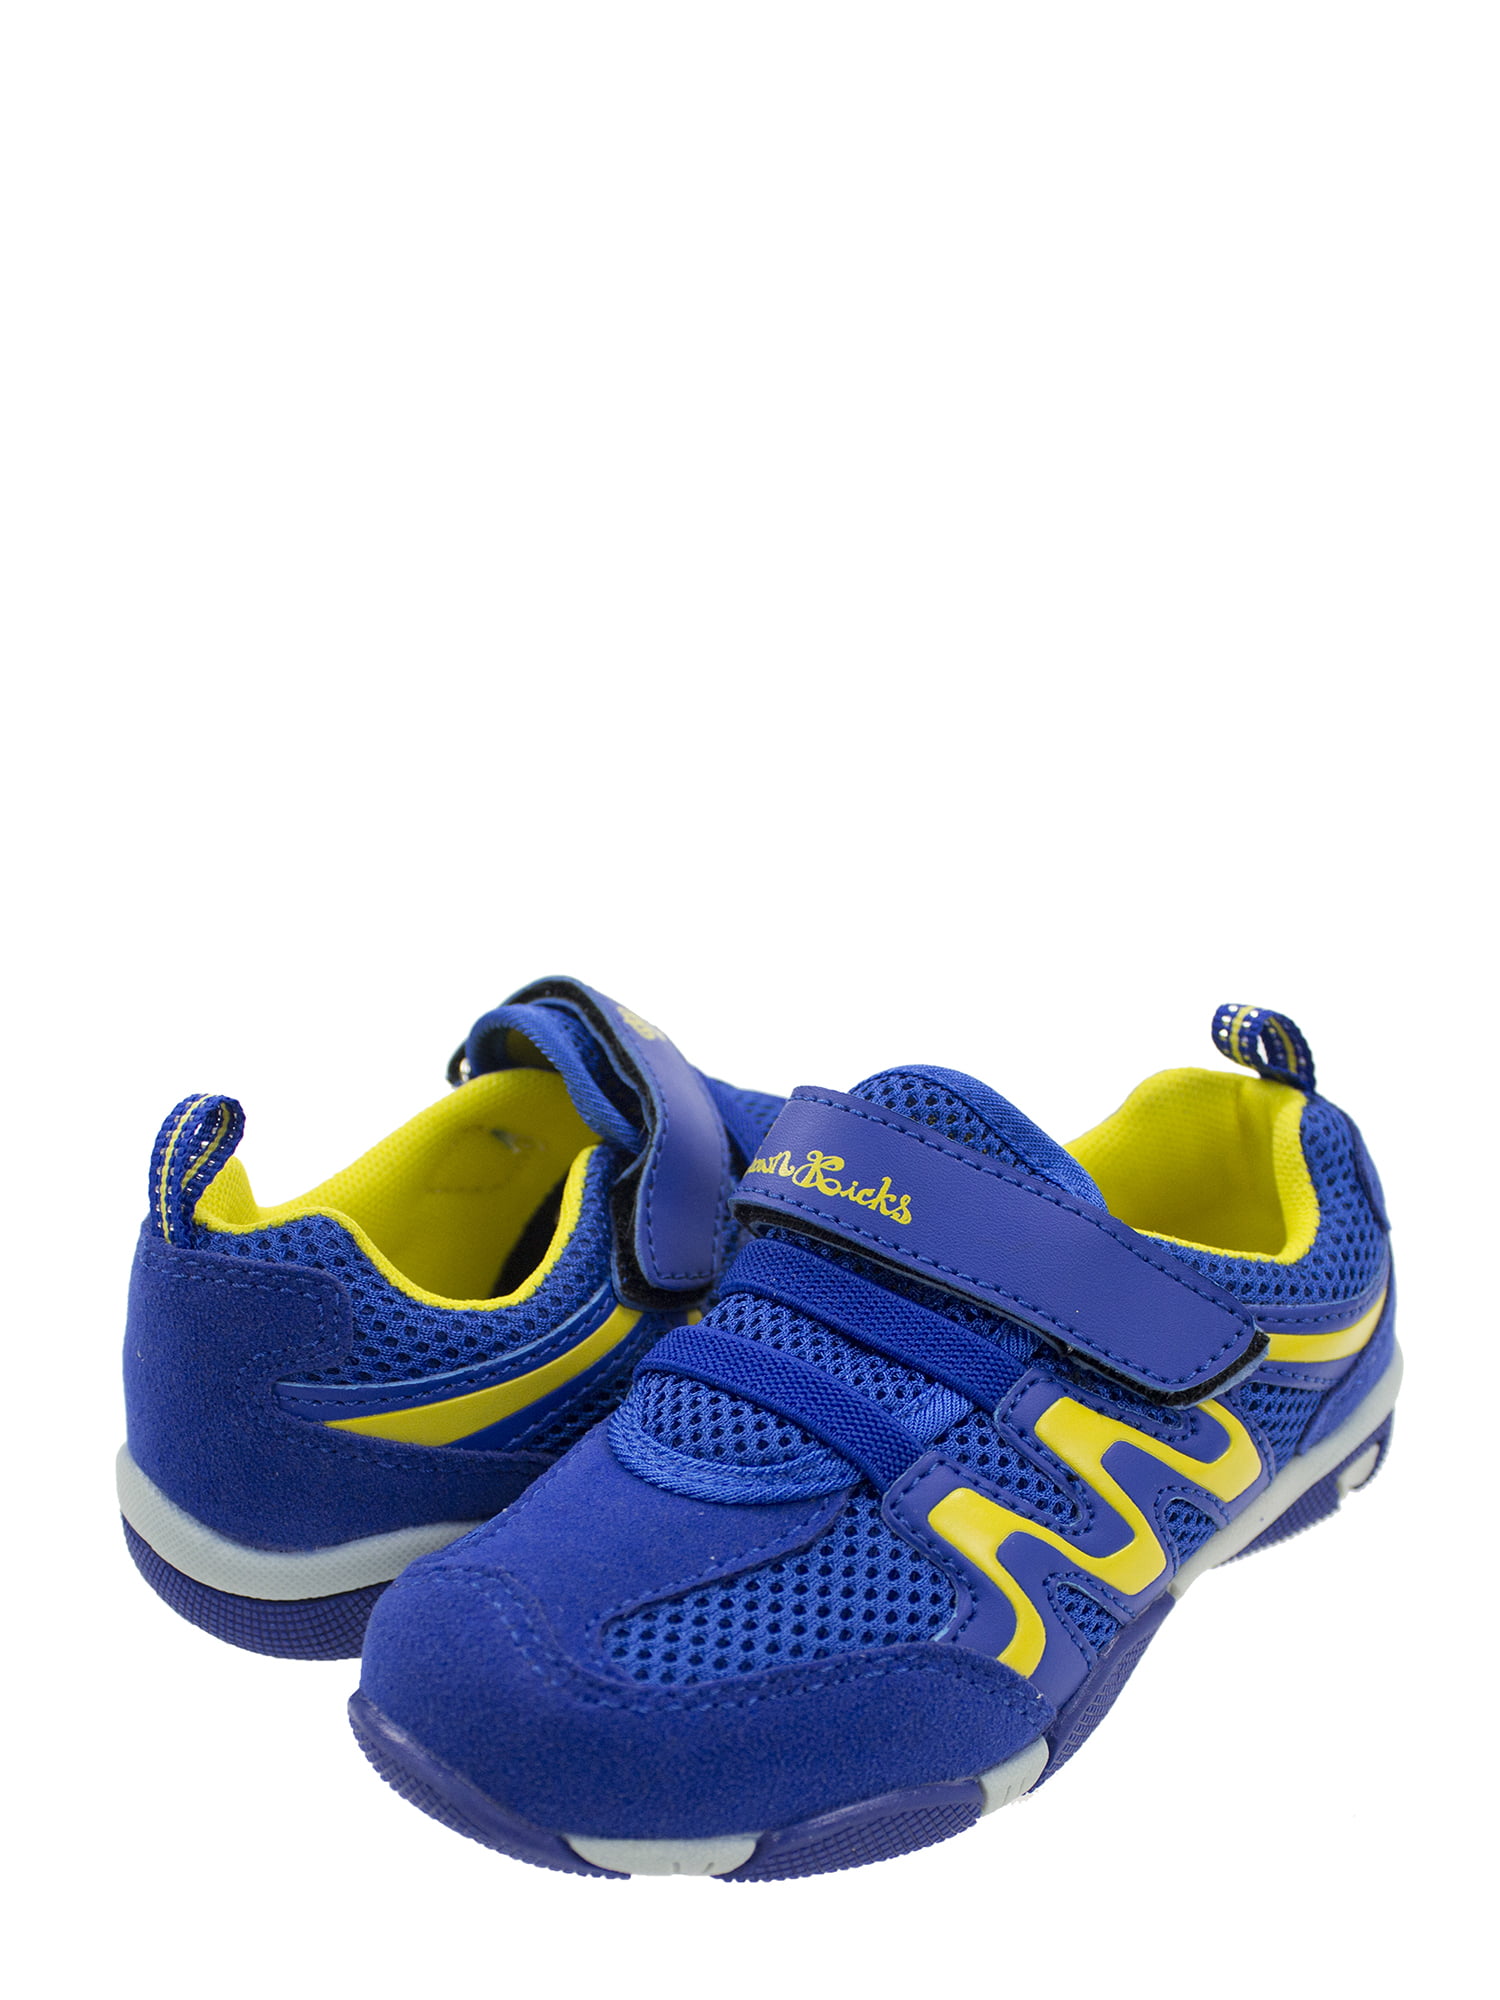 blue and yellow toddler sneakers